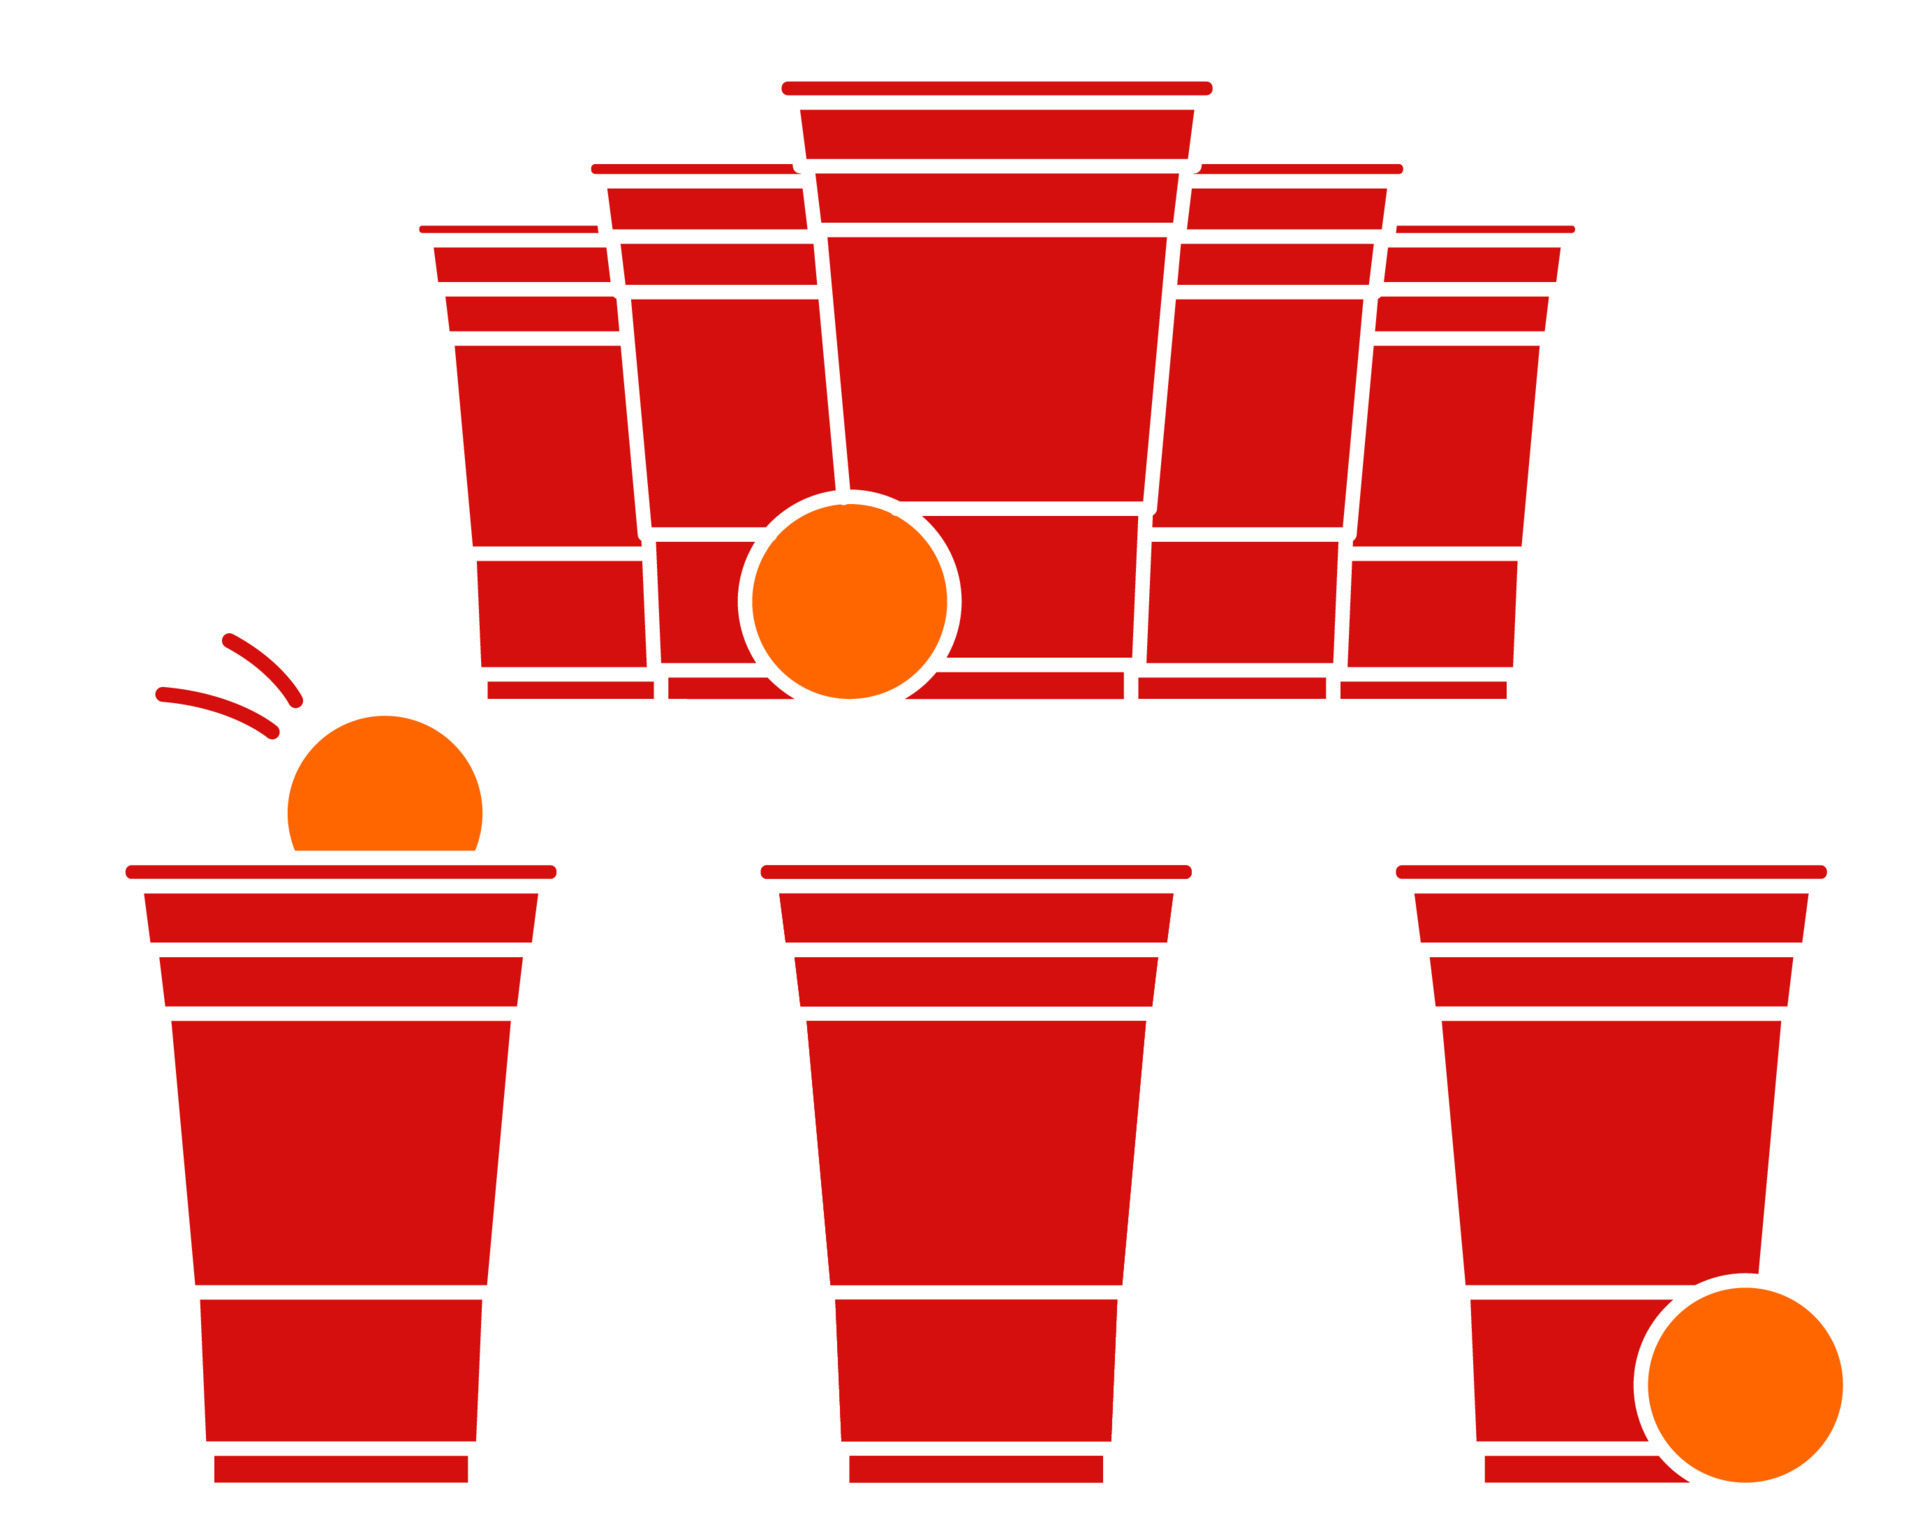 Red Cup svg - Party cup svg - Solo cup interpretation - beer pong cups -  beer glass - Red solo cup interpretation